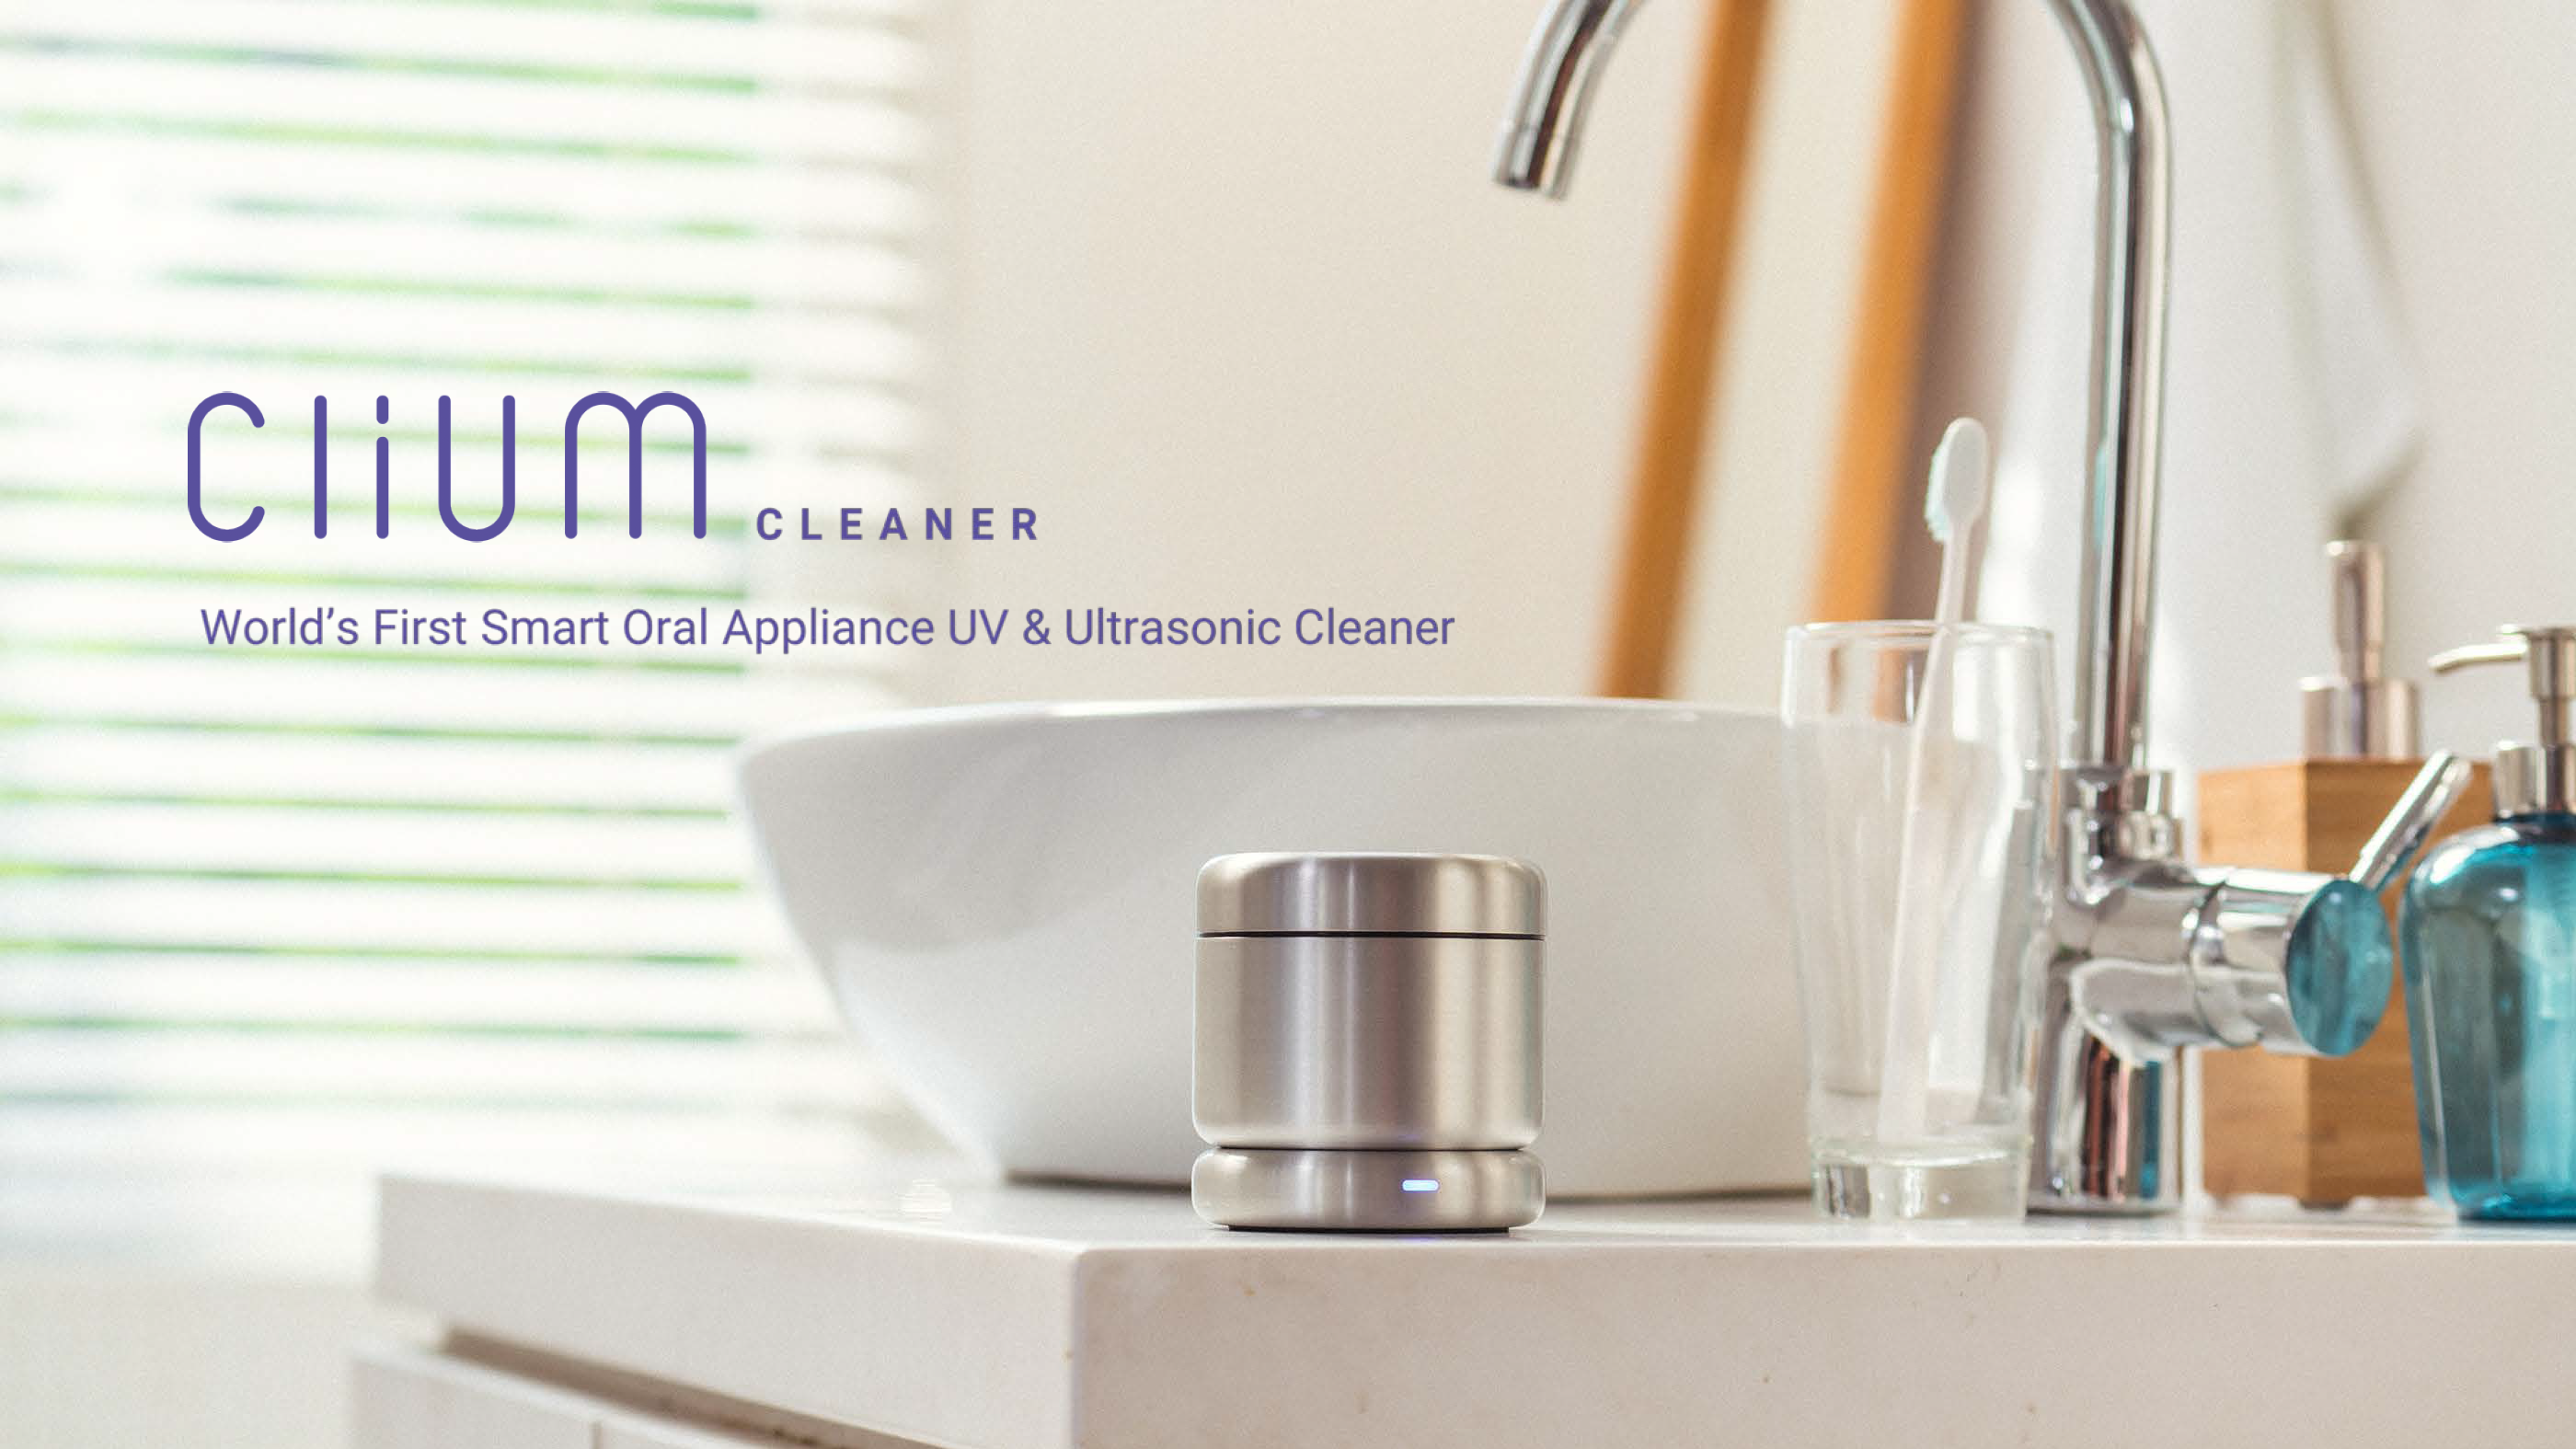 Clium CLEANER
World’s First Smart Oral Applicance UV & Ultrasonic cleaner